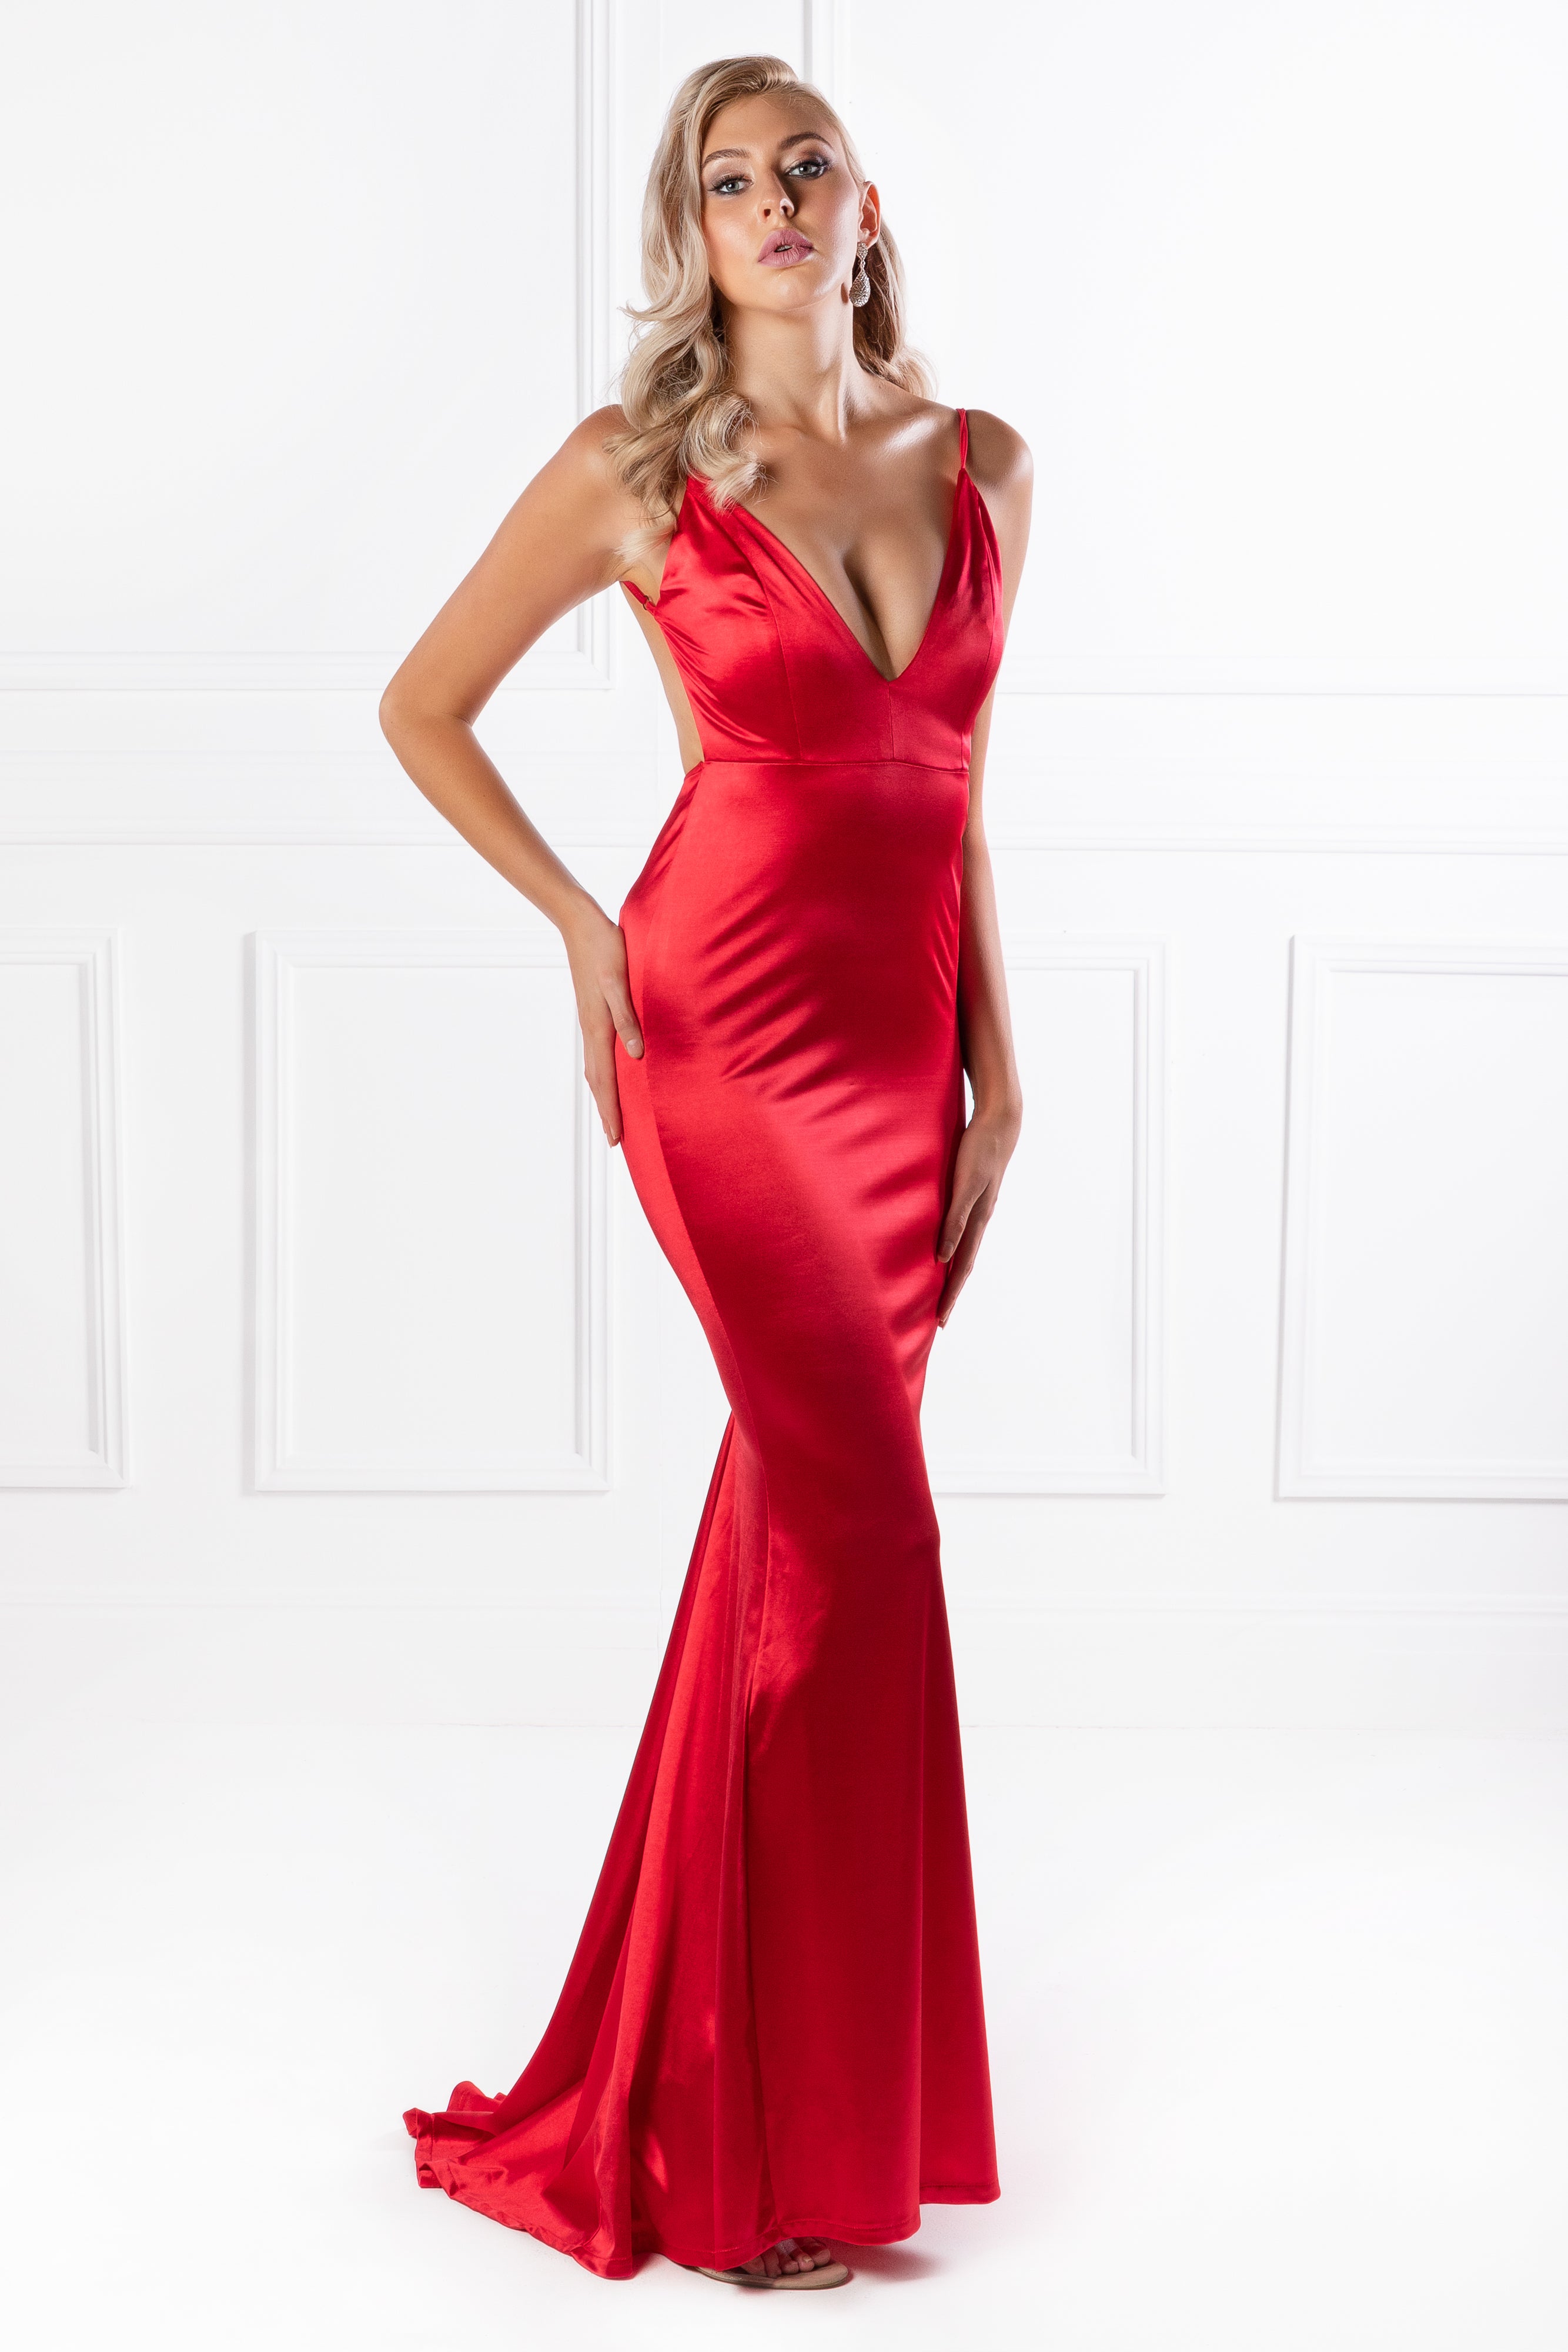 Honey Couture MILEE Metallic Red Low Back Mermaid Evening Gown Dress {vendor} AfterPay Humm ZipPay LayBuy Sezzle